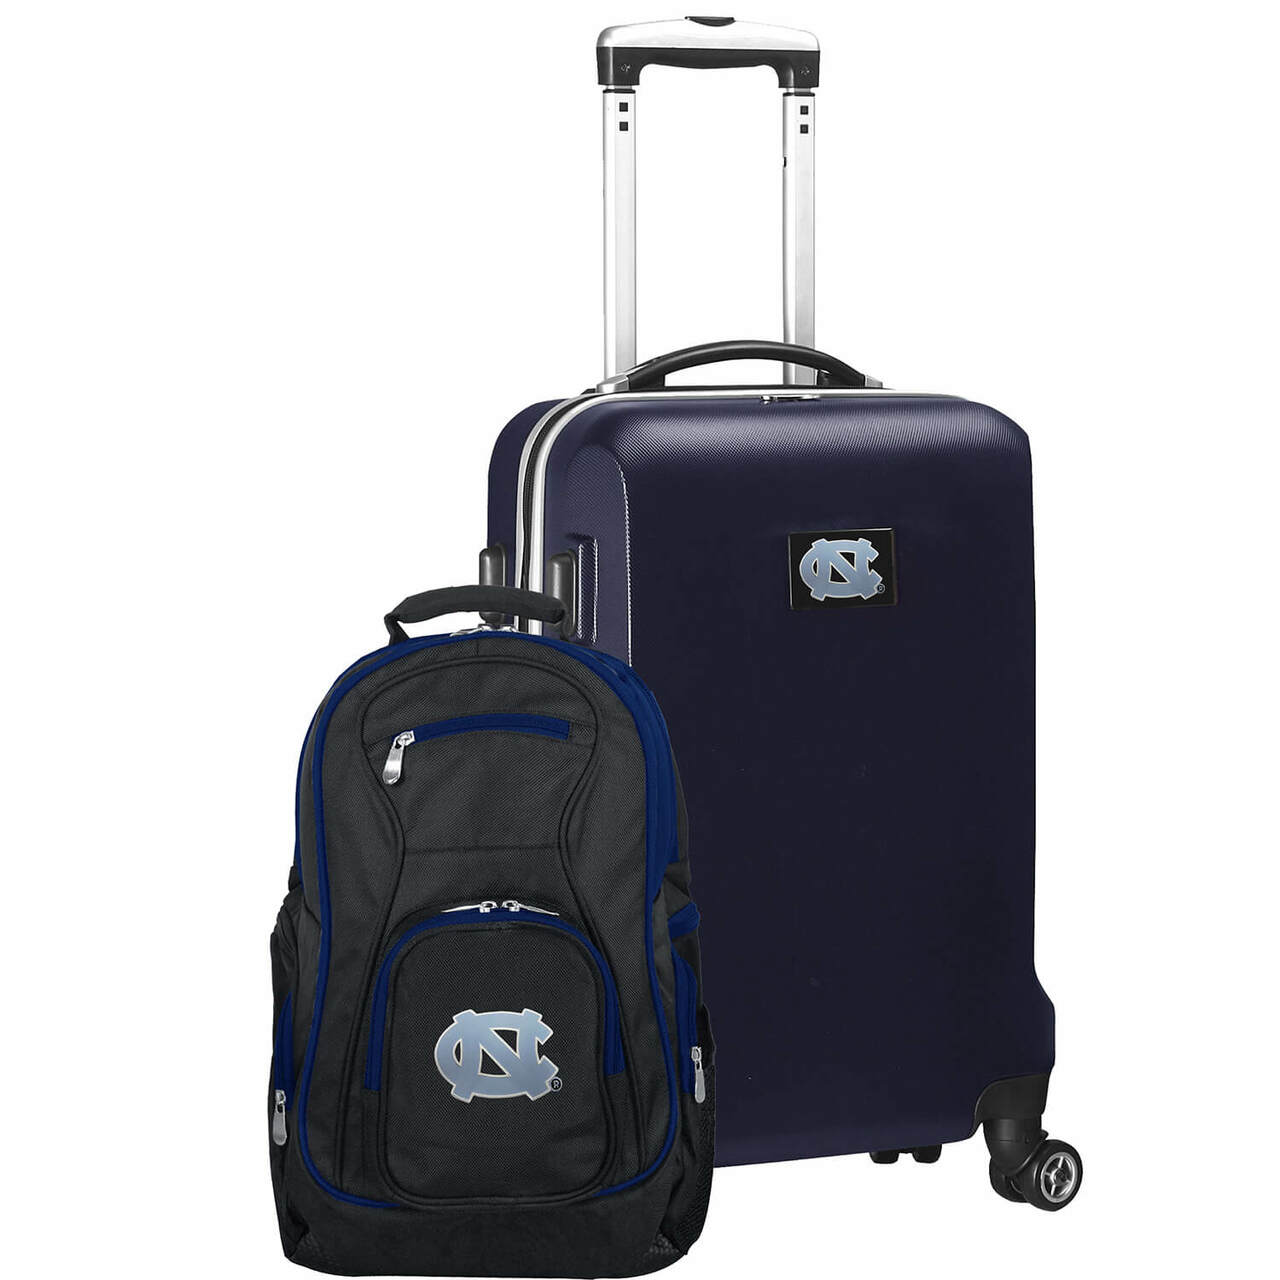 UNC Tar Heels Deluxe 2-Piece Backpack and Carry on Set in Navy